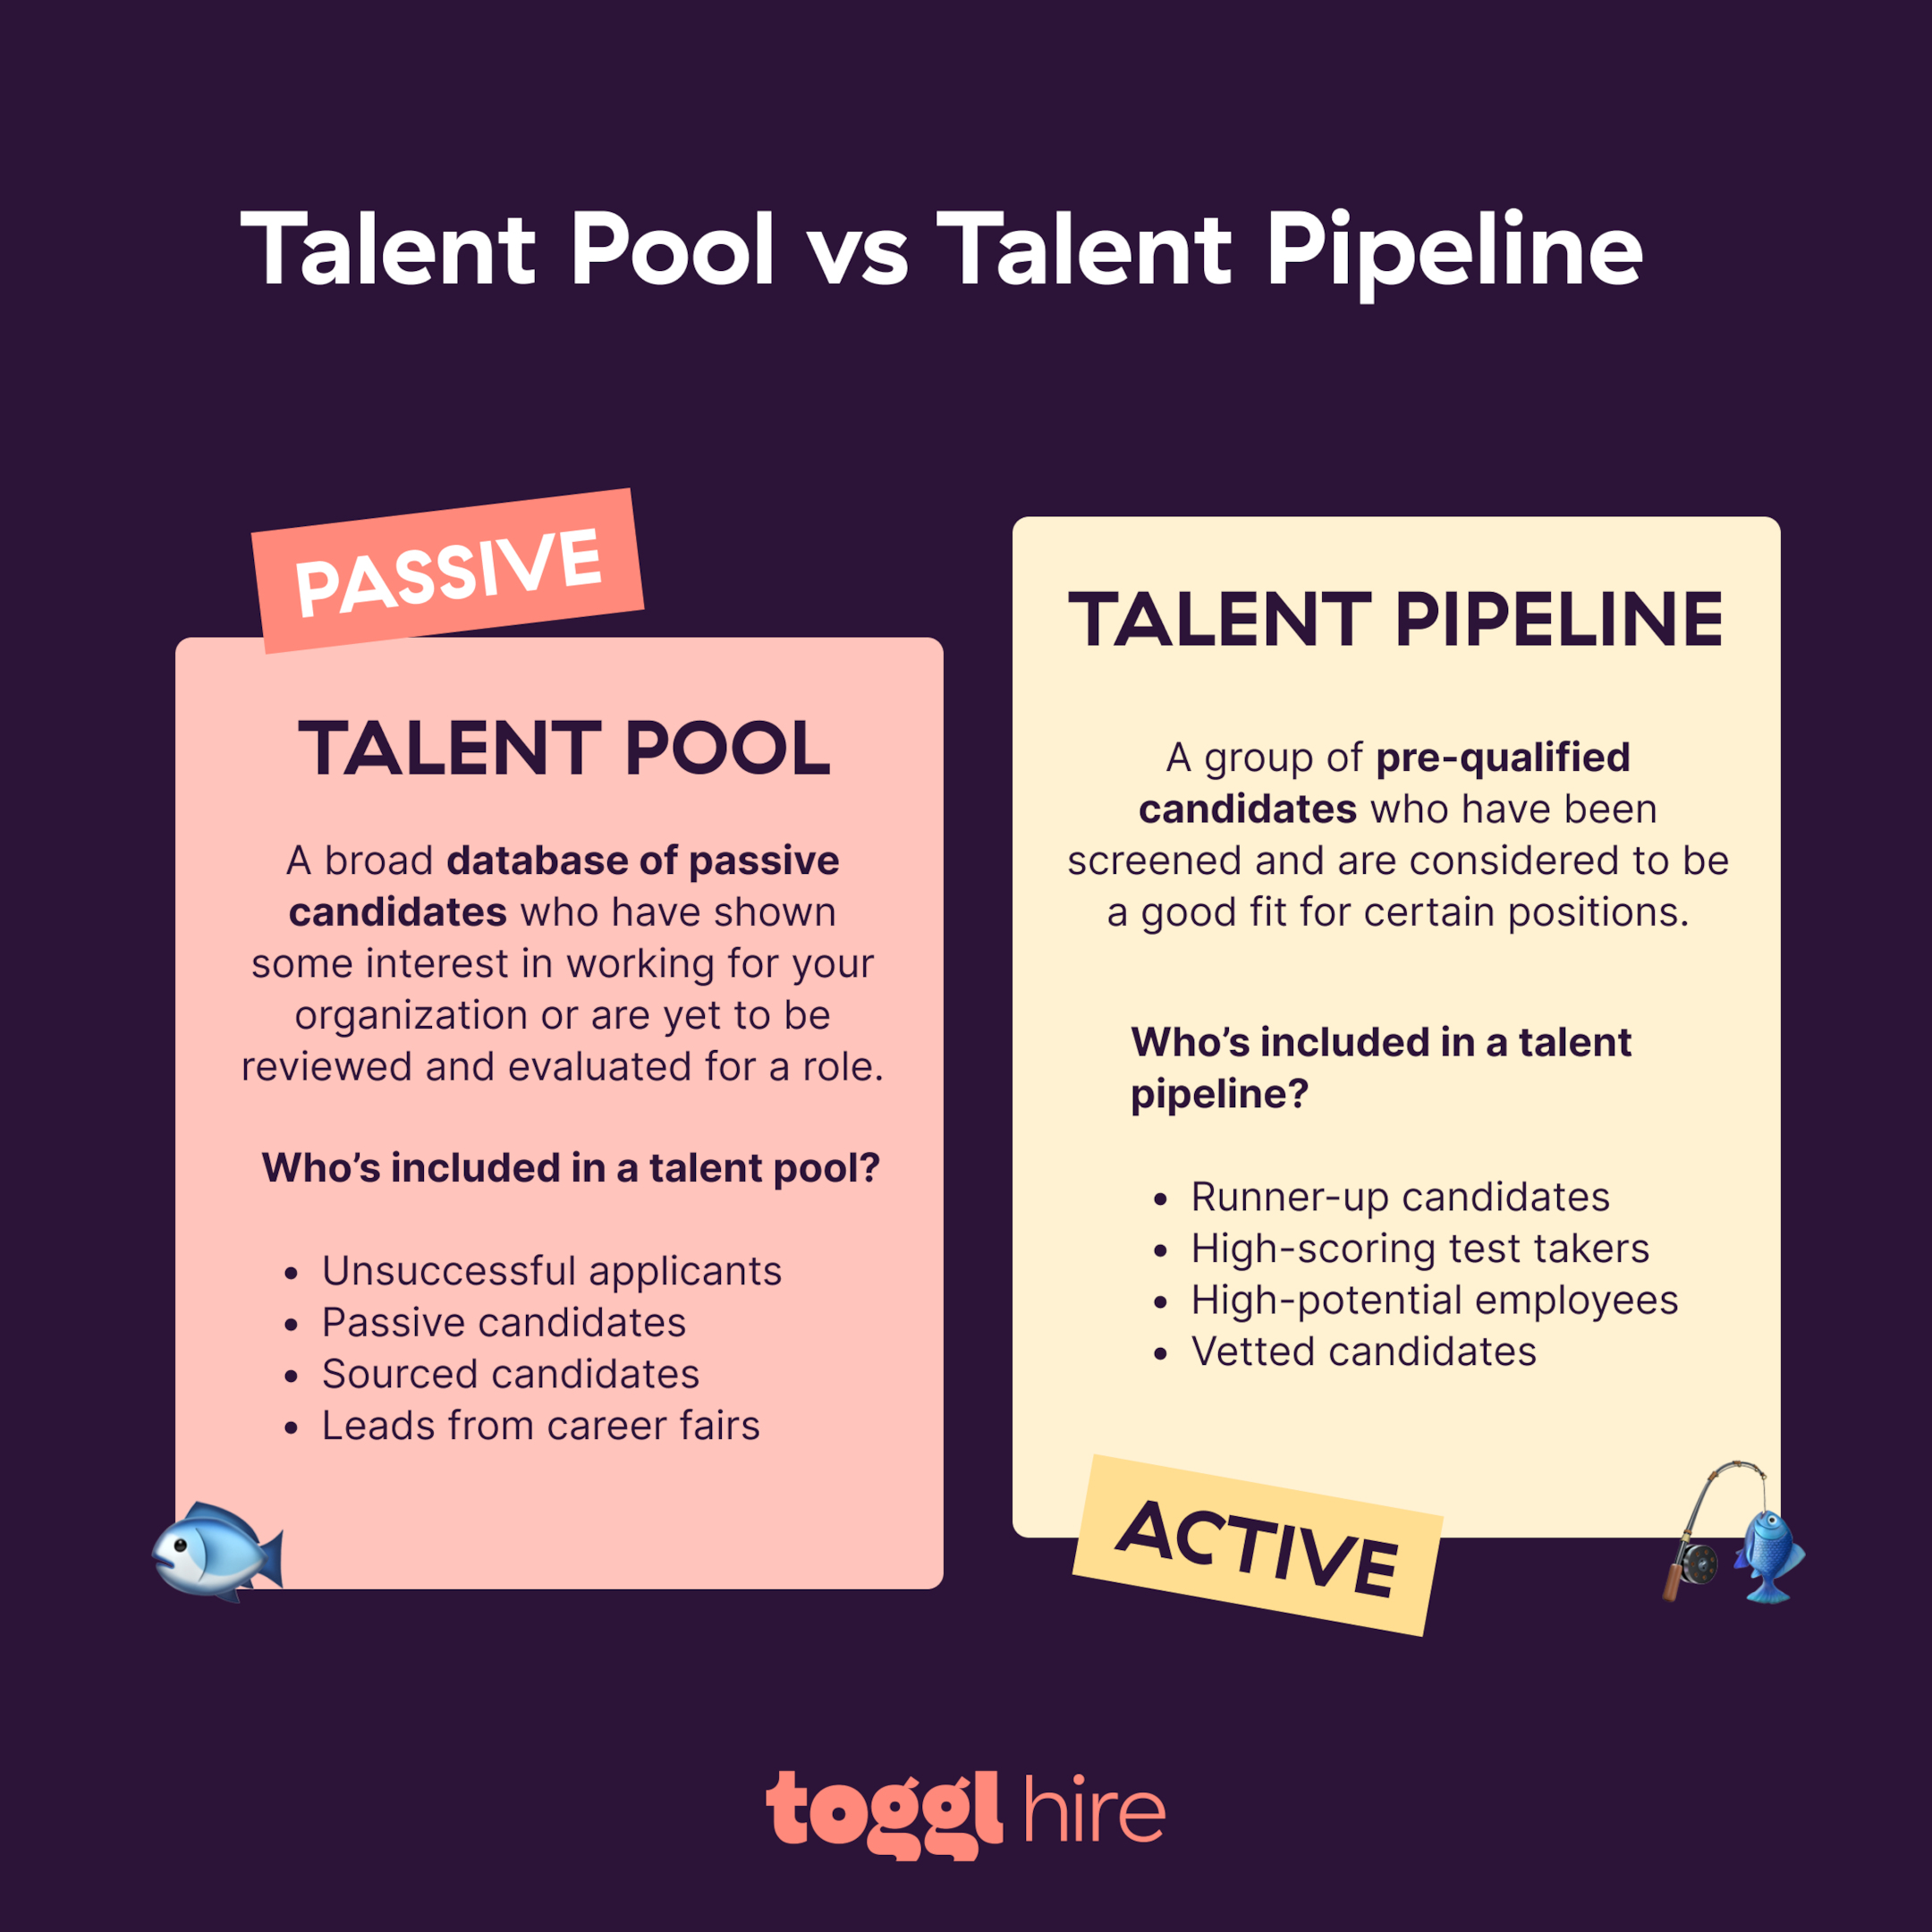 When you build a high-quality talent pool, filling a talent pipeline gets a lot easier